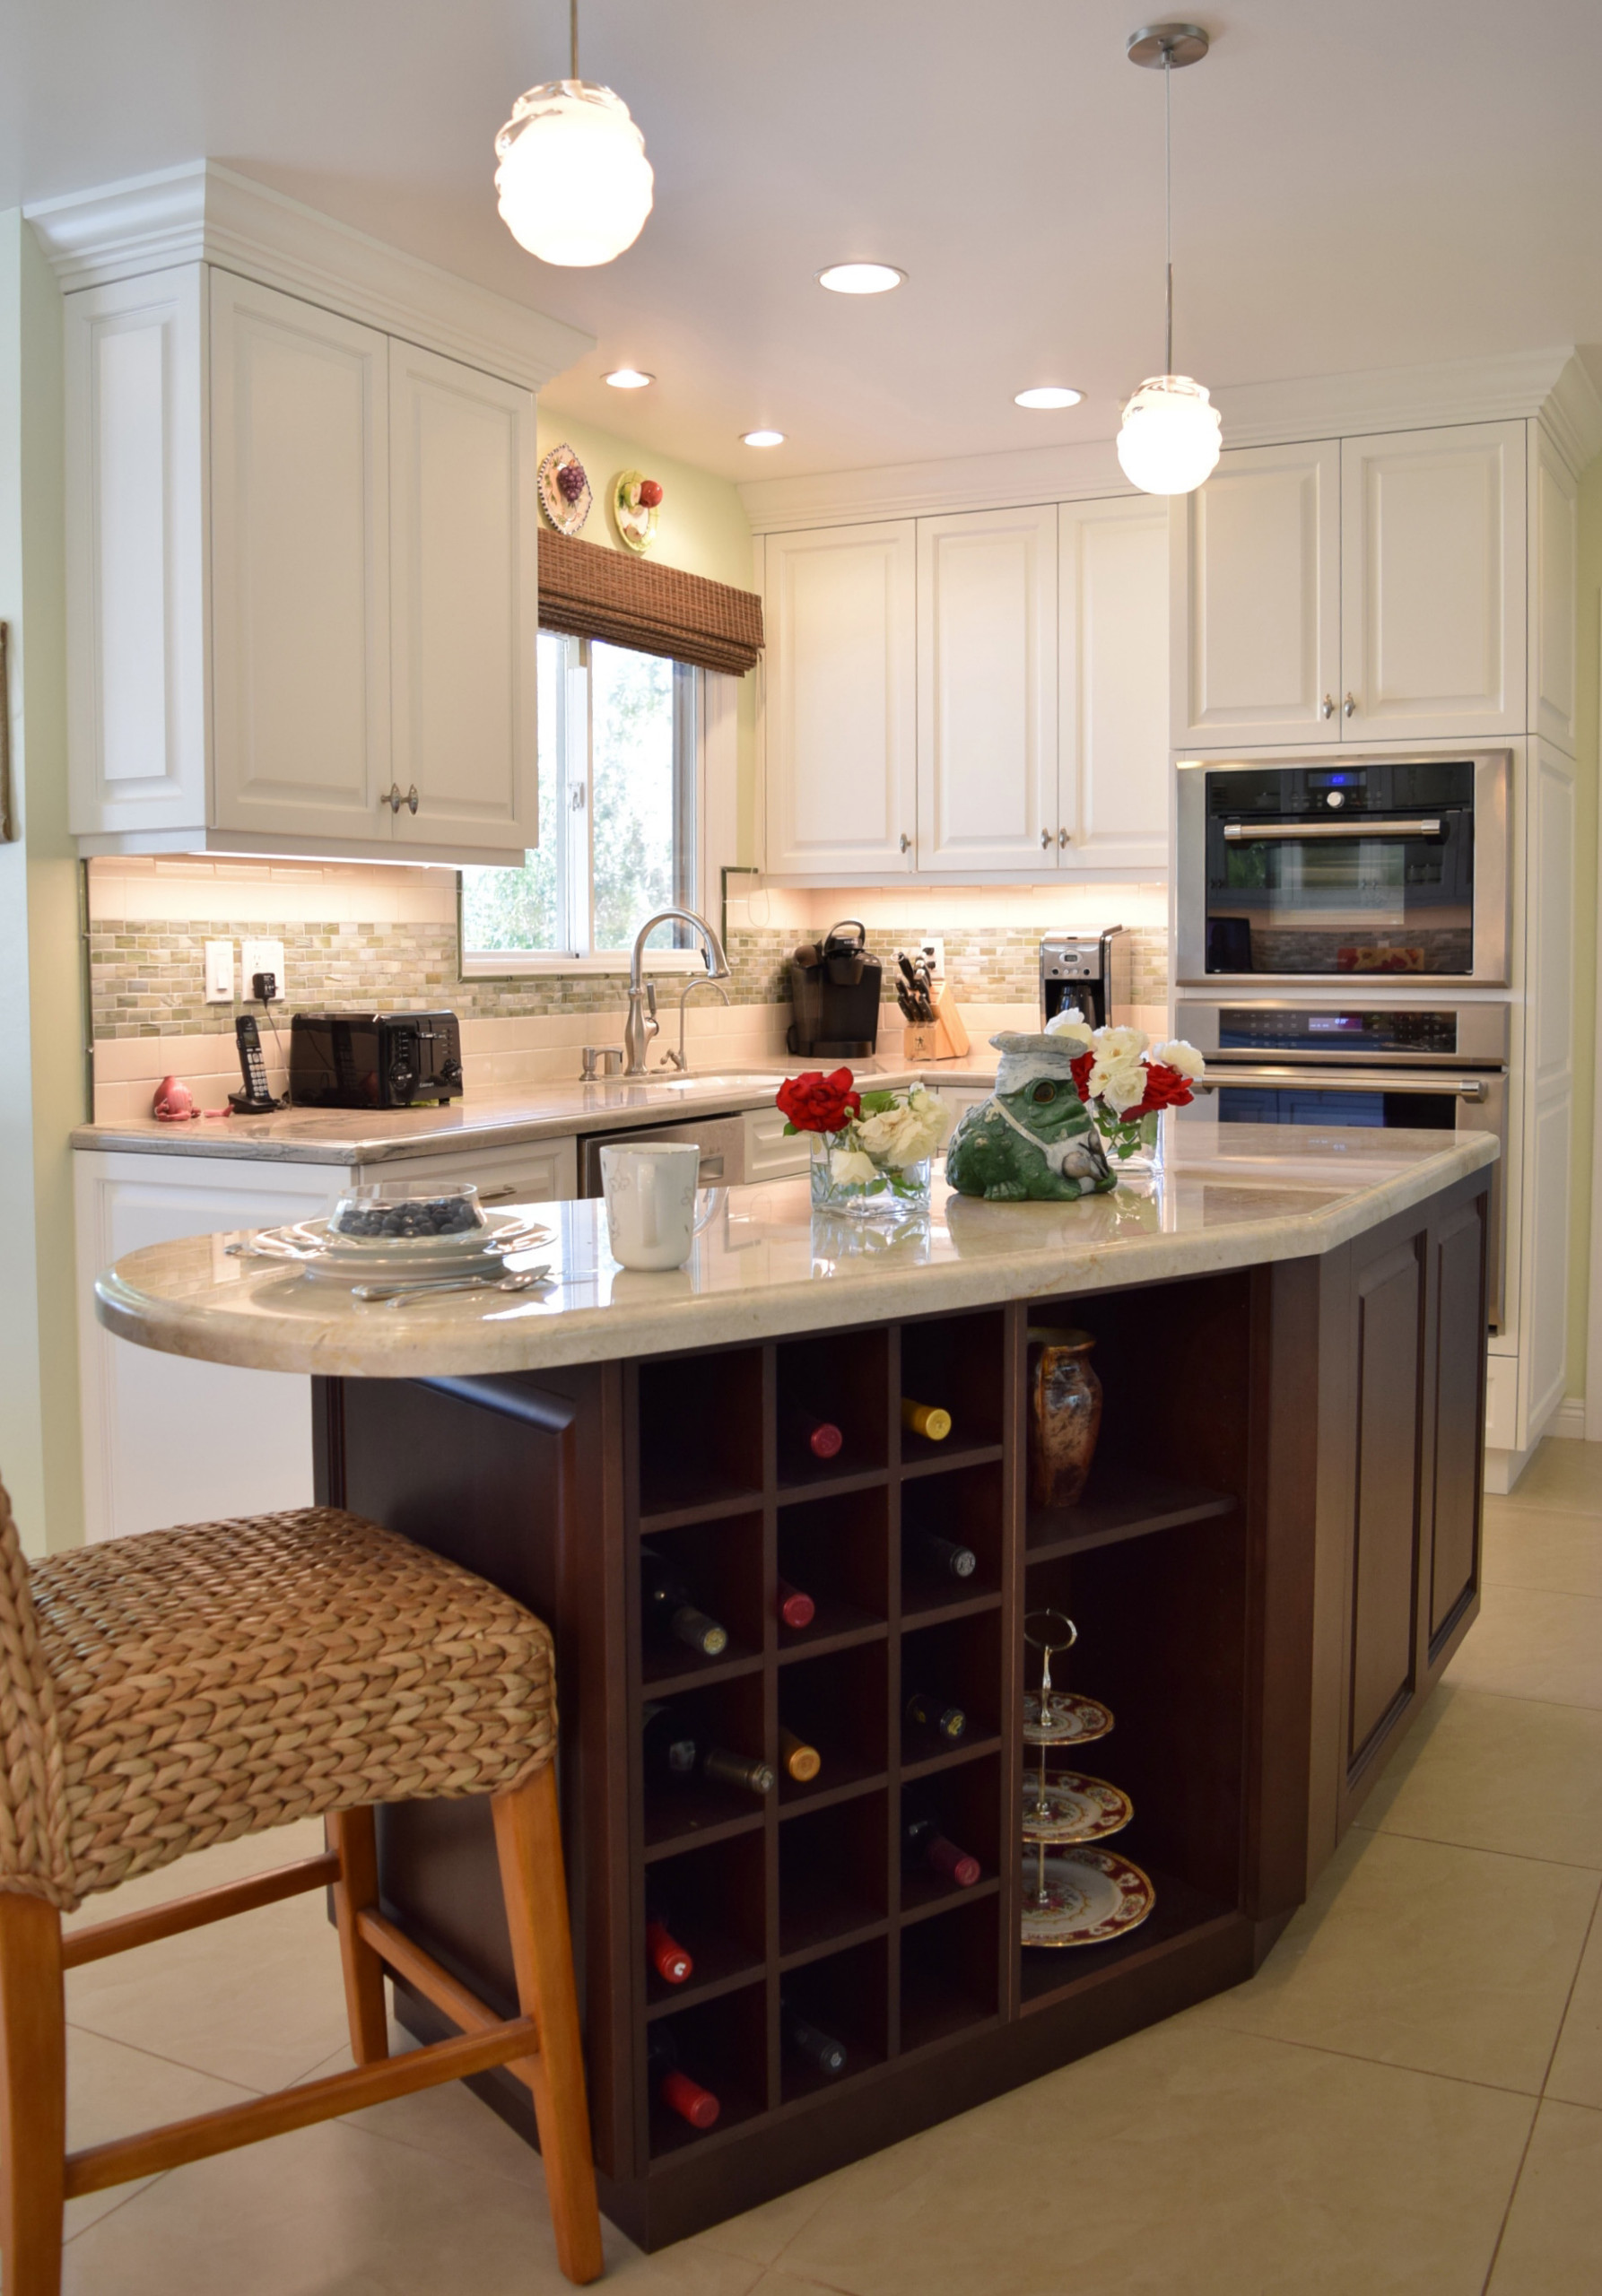 My Transitional Kitchen Design for a Client in Woodland Hills, Ca.